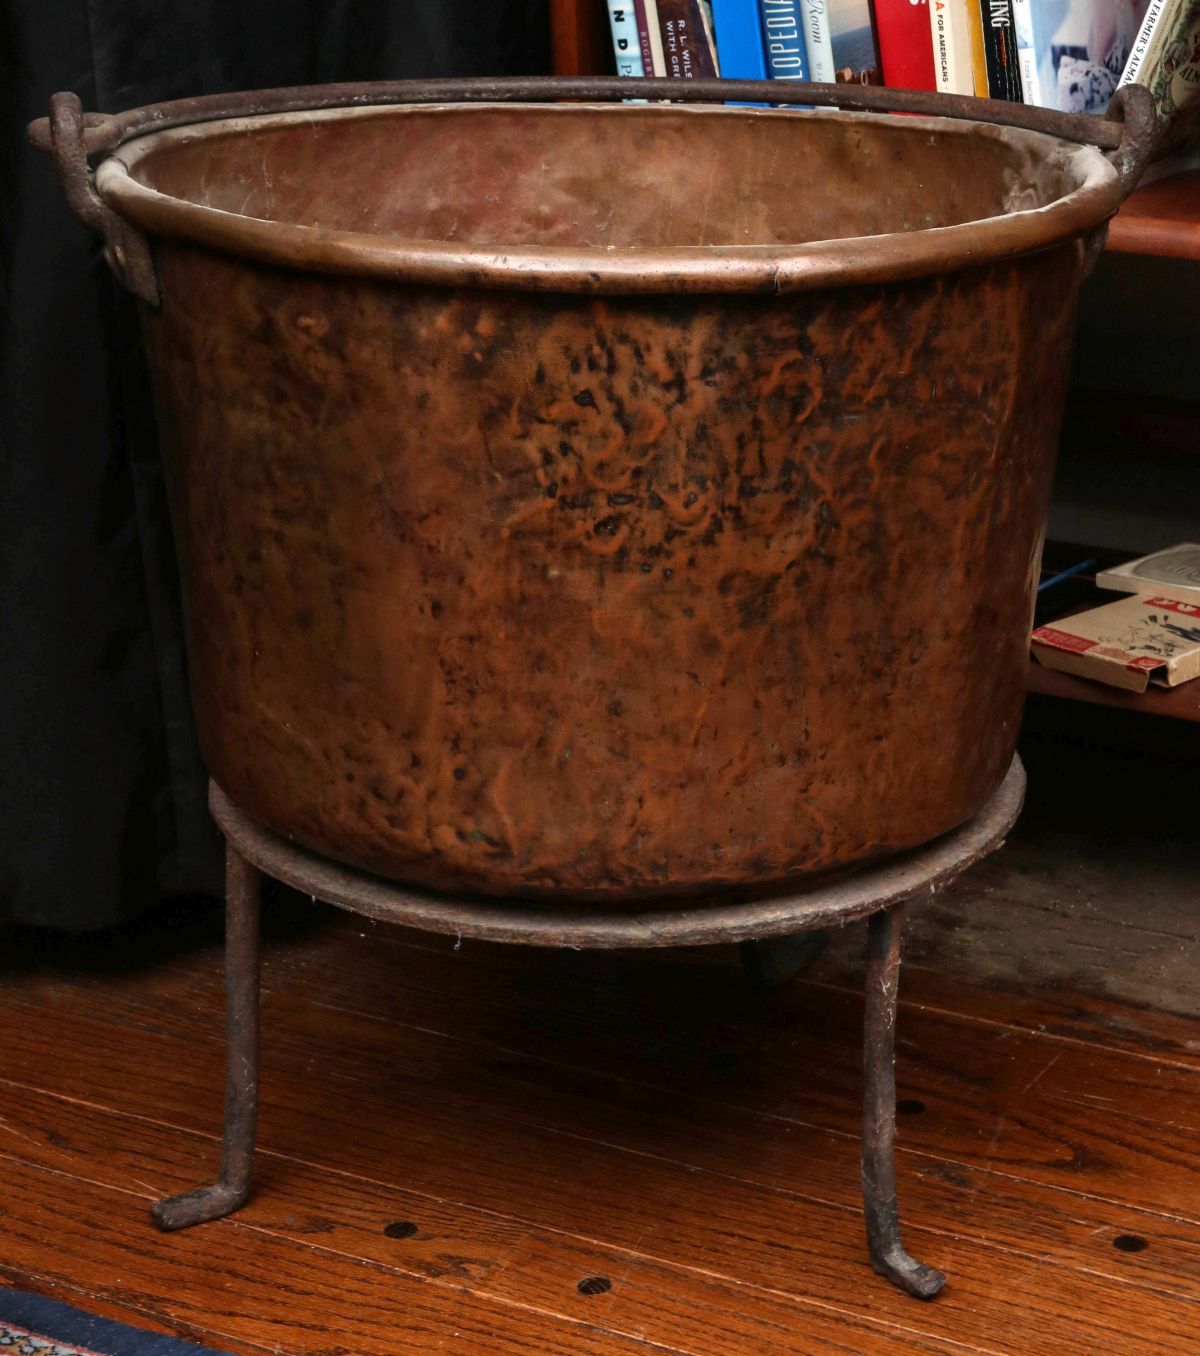 A LARGE RUSTIC COPPER KETTLE ON IRON STAND